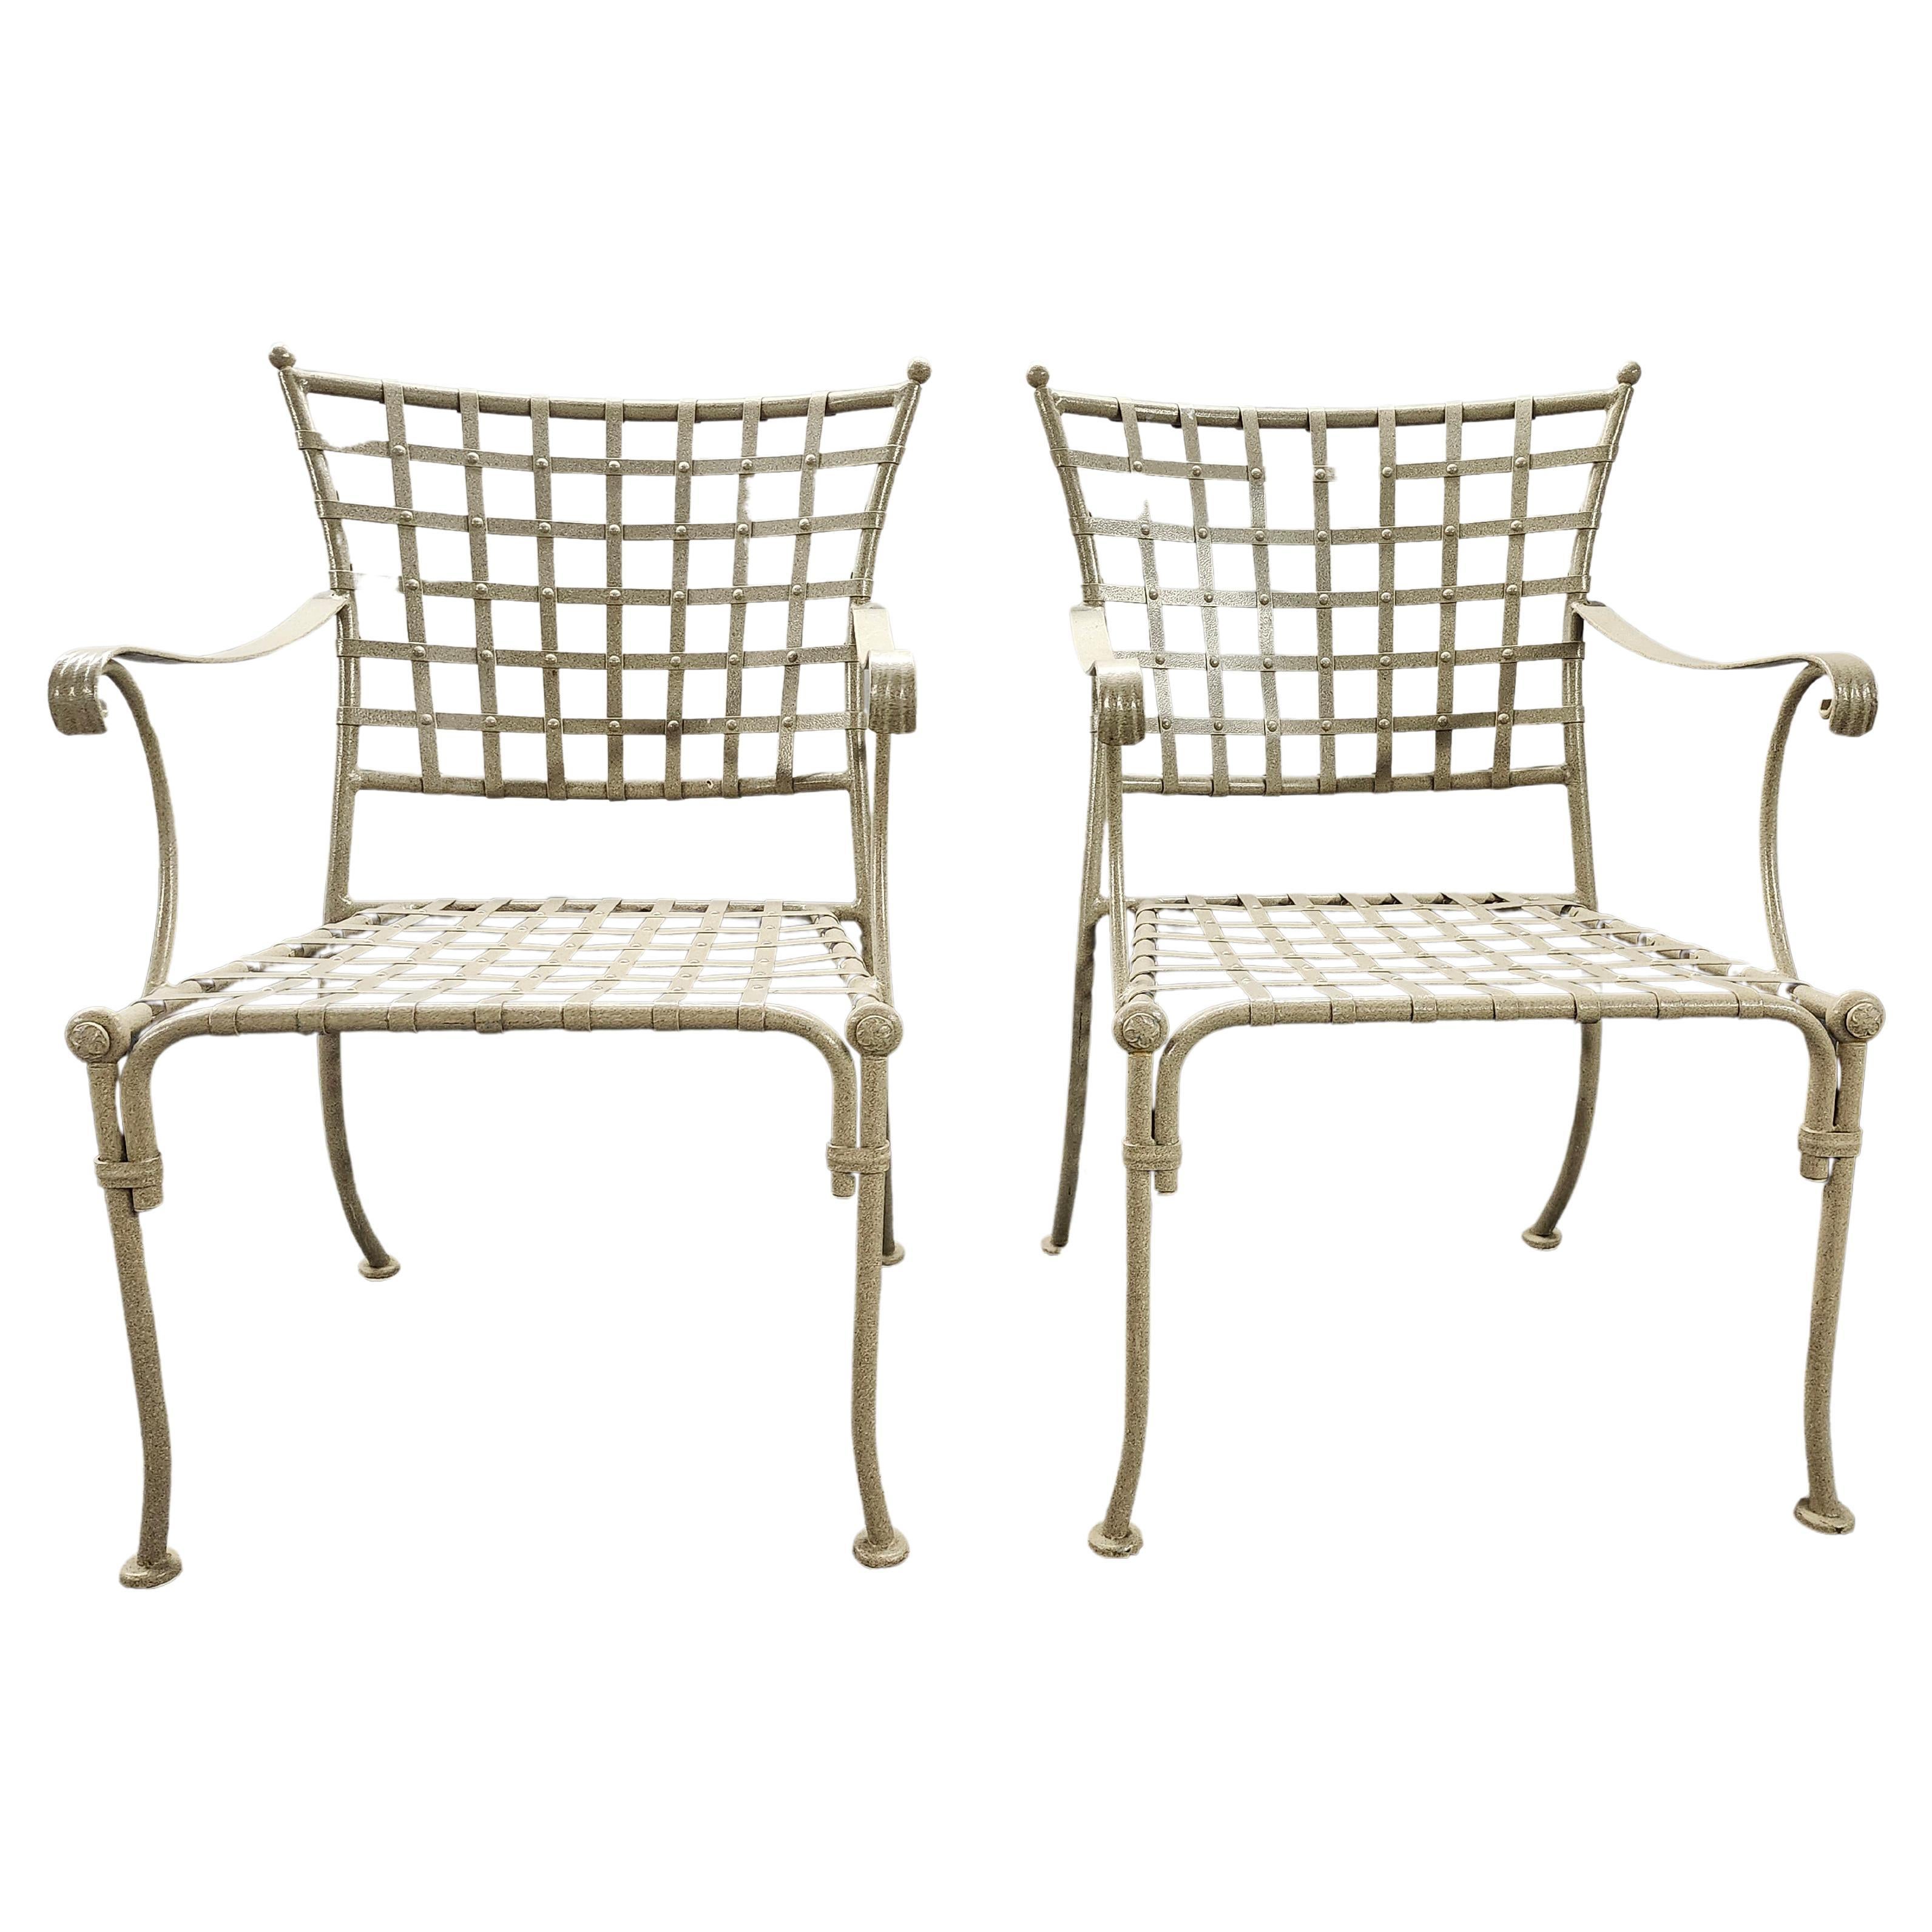 Vintage Wrought Iron Patio Outdoor Chairs